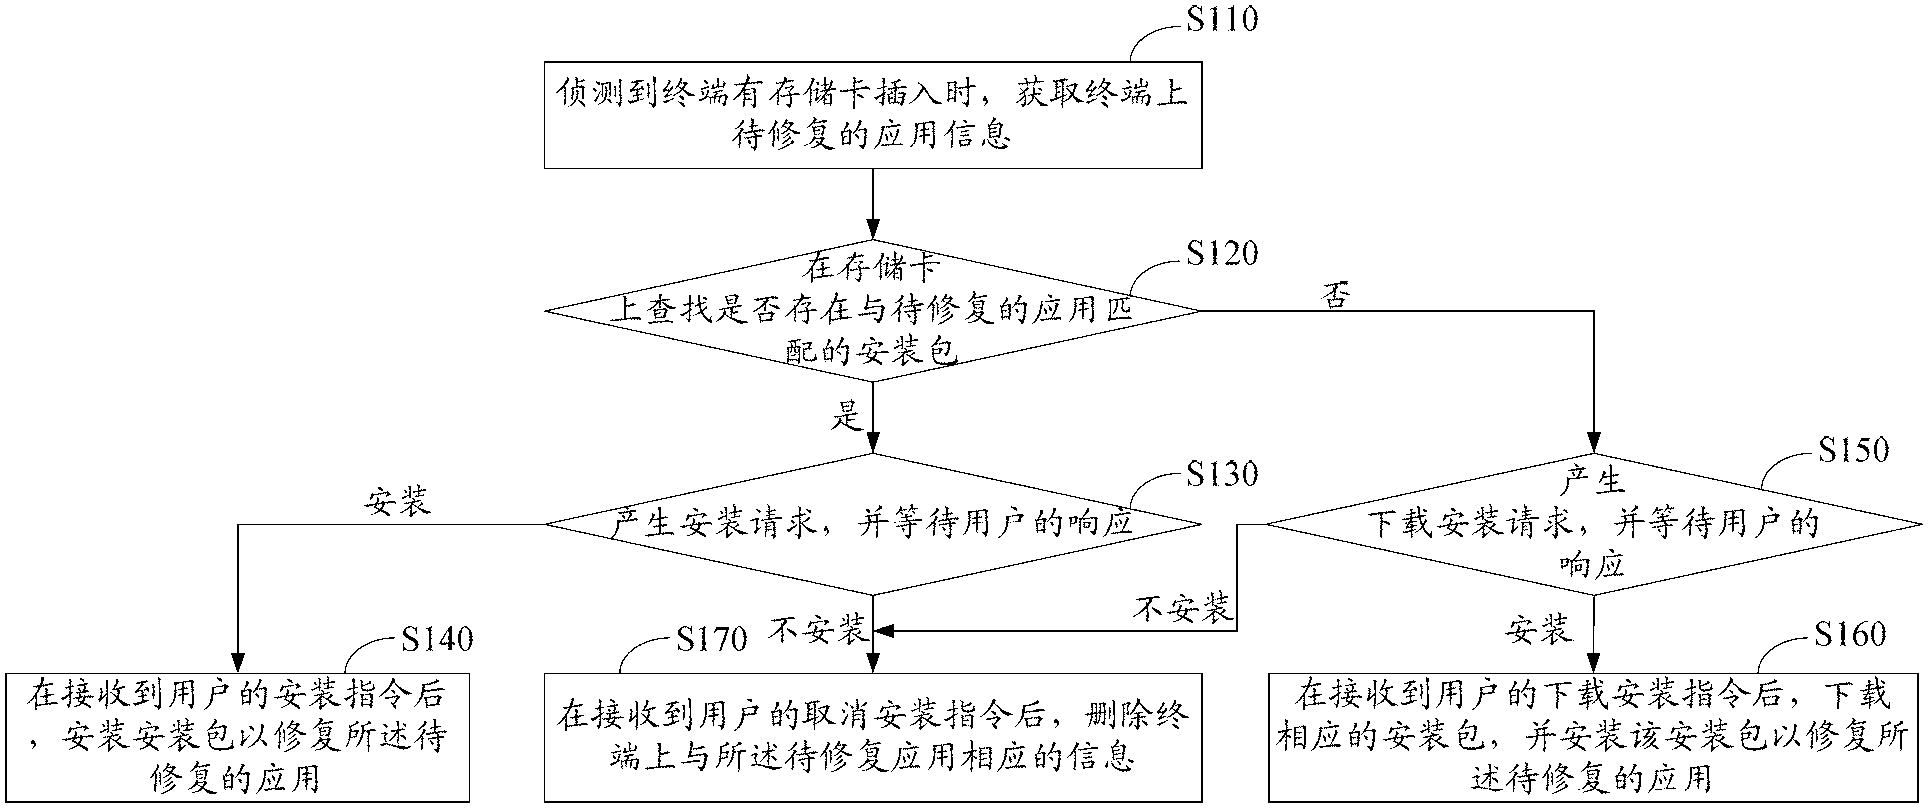 Method and device for automatically repairing system application